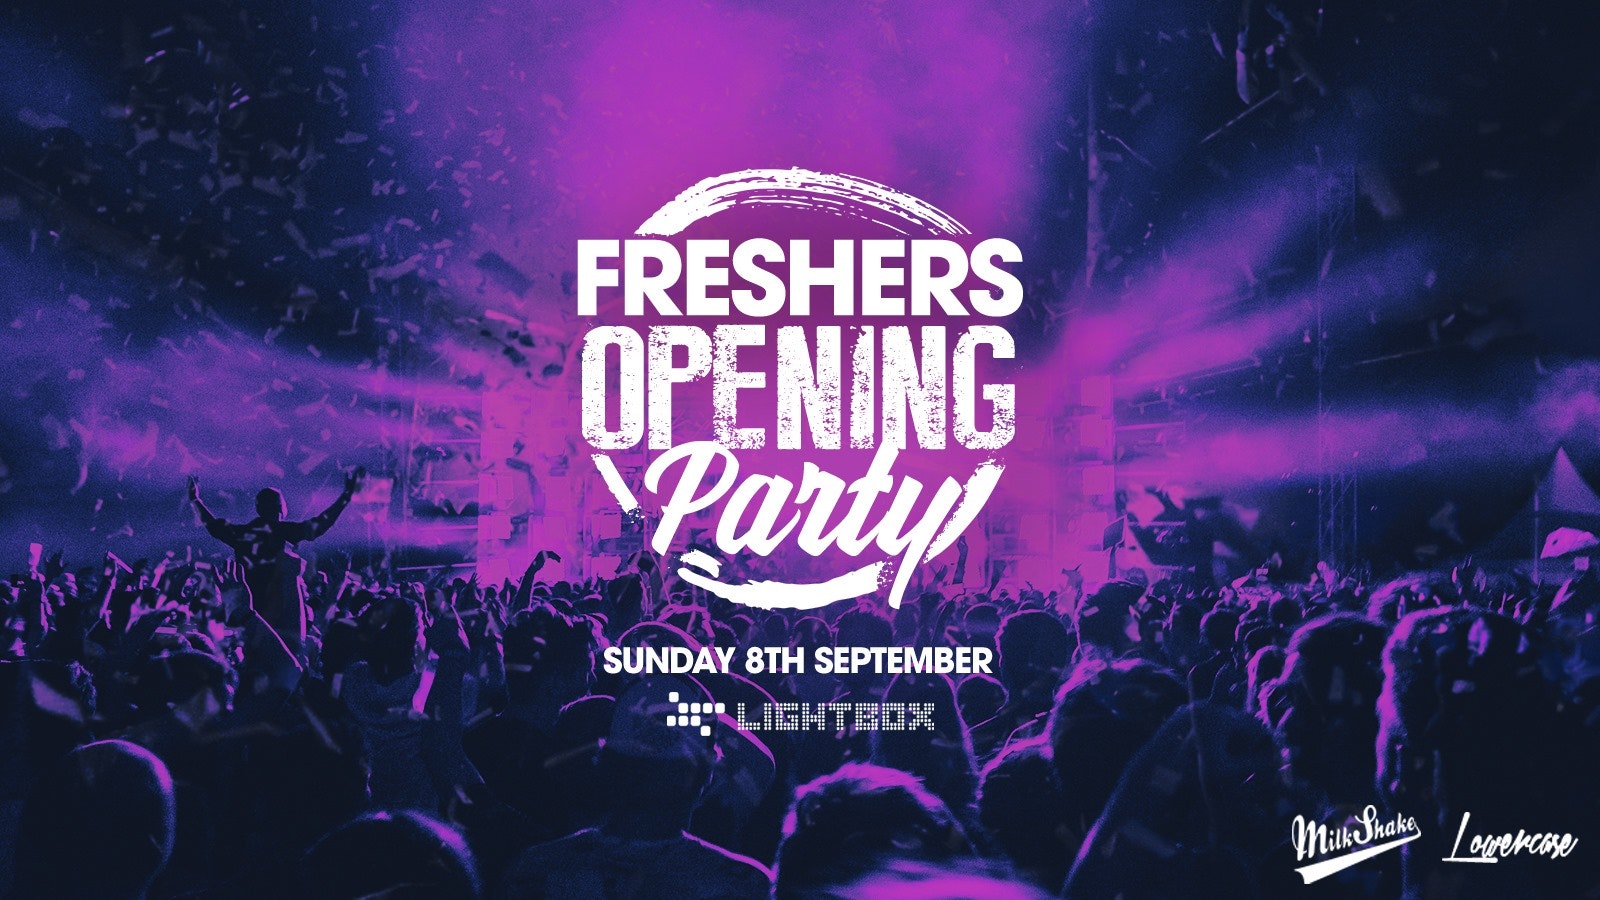 The Official Freshers Opening Party 2019 ⚡ Tickets On The Door